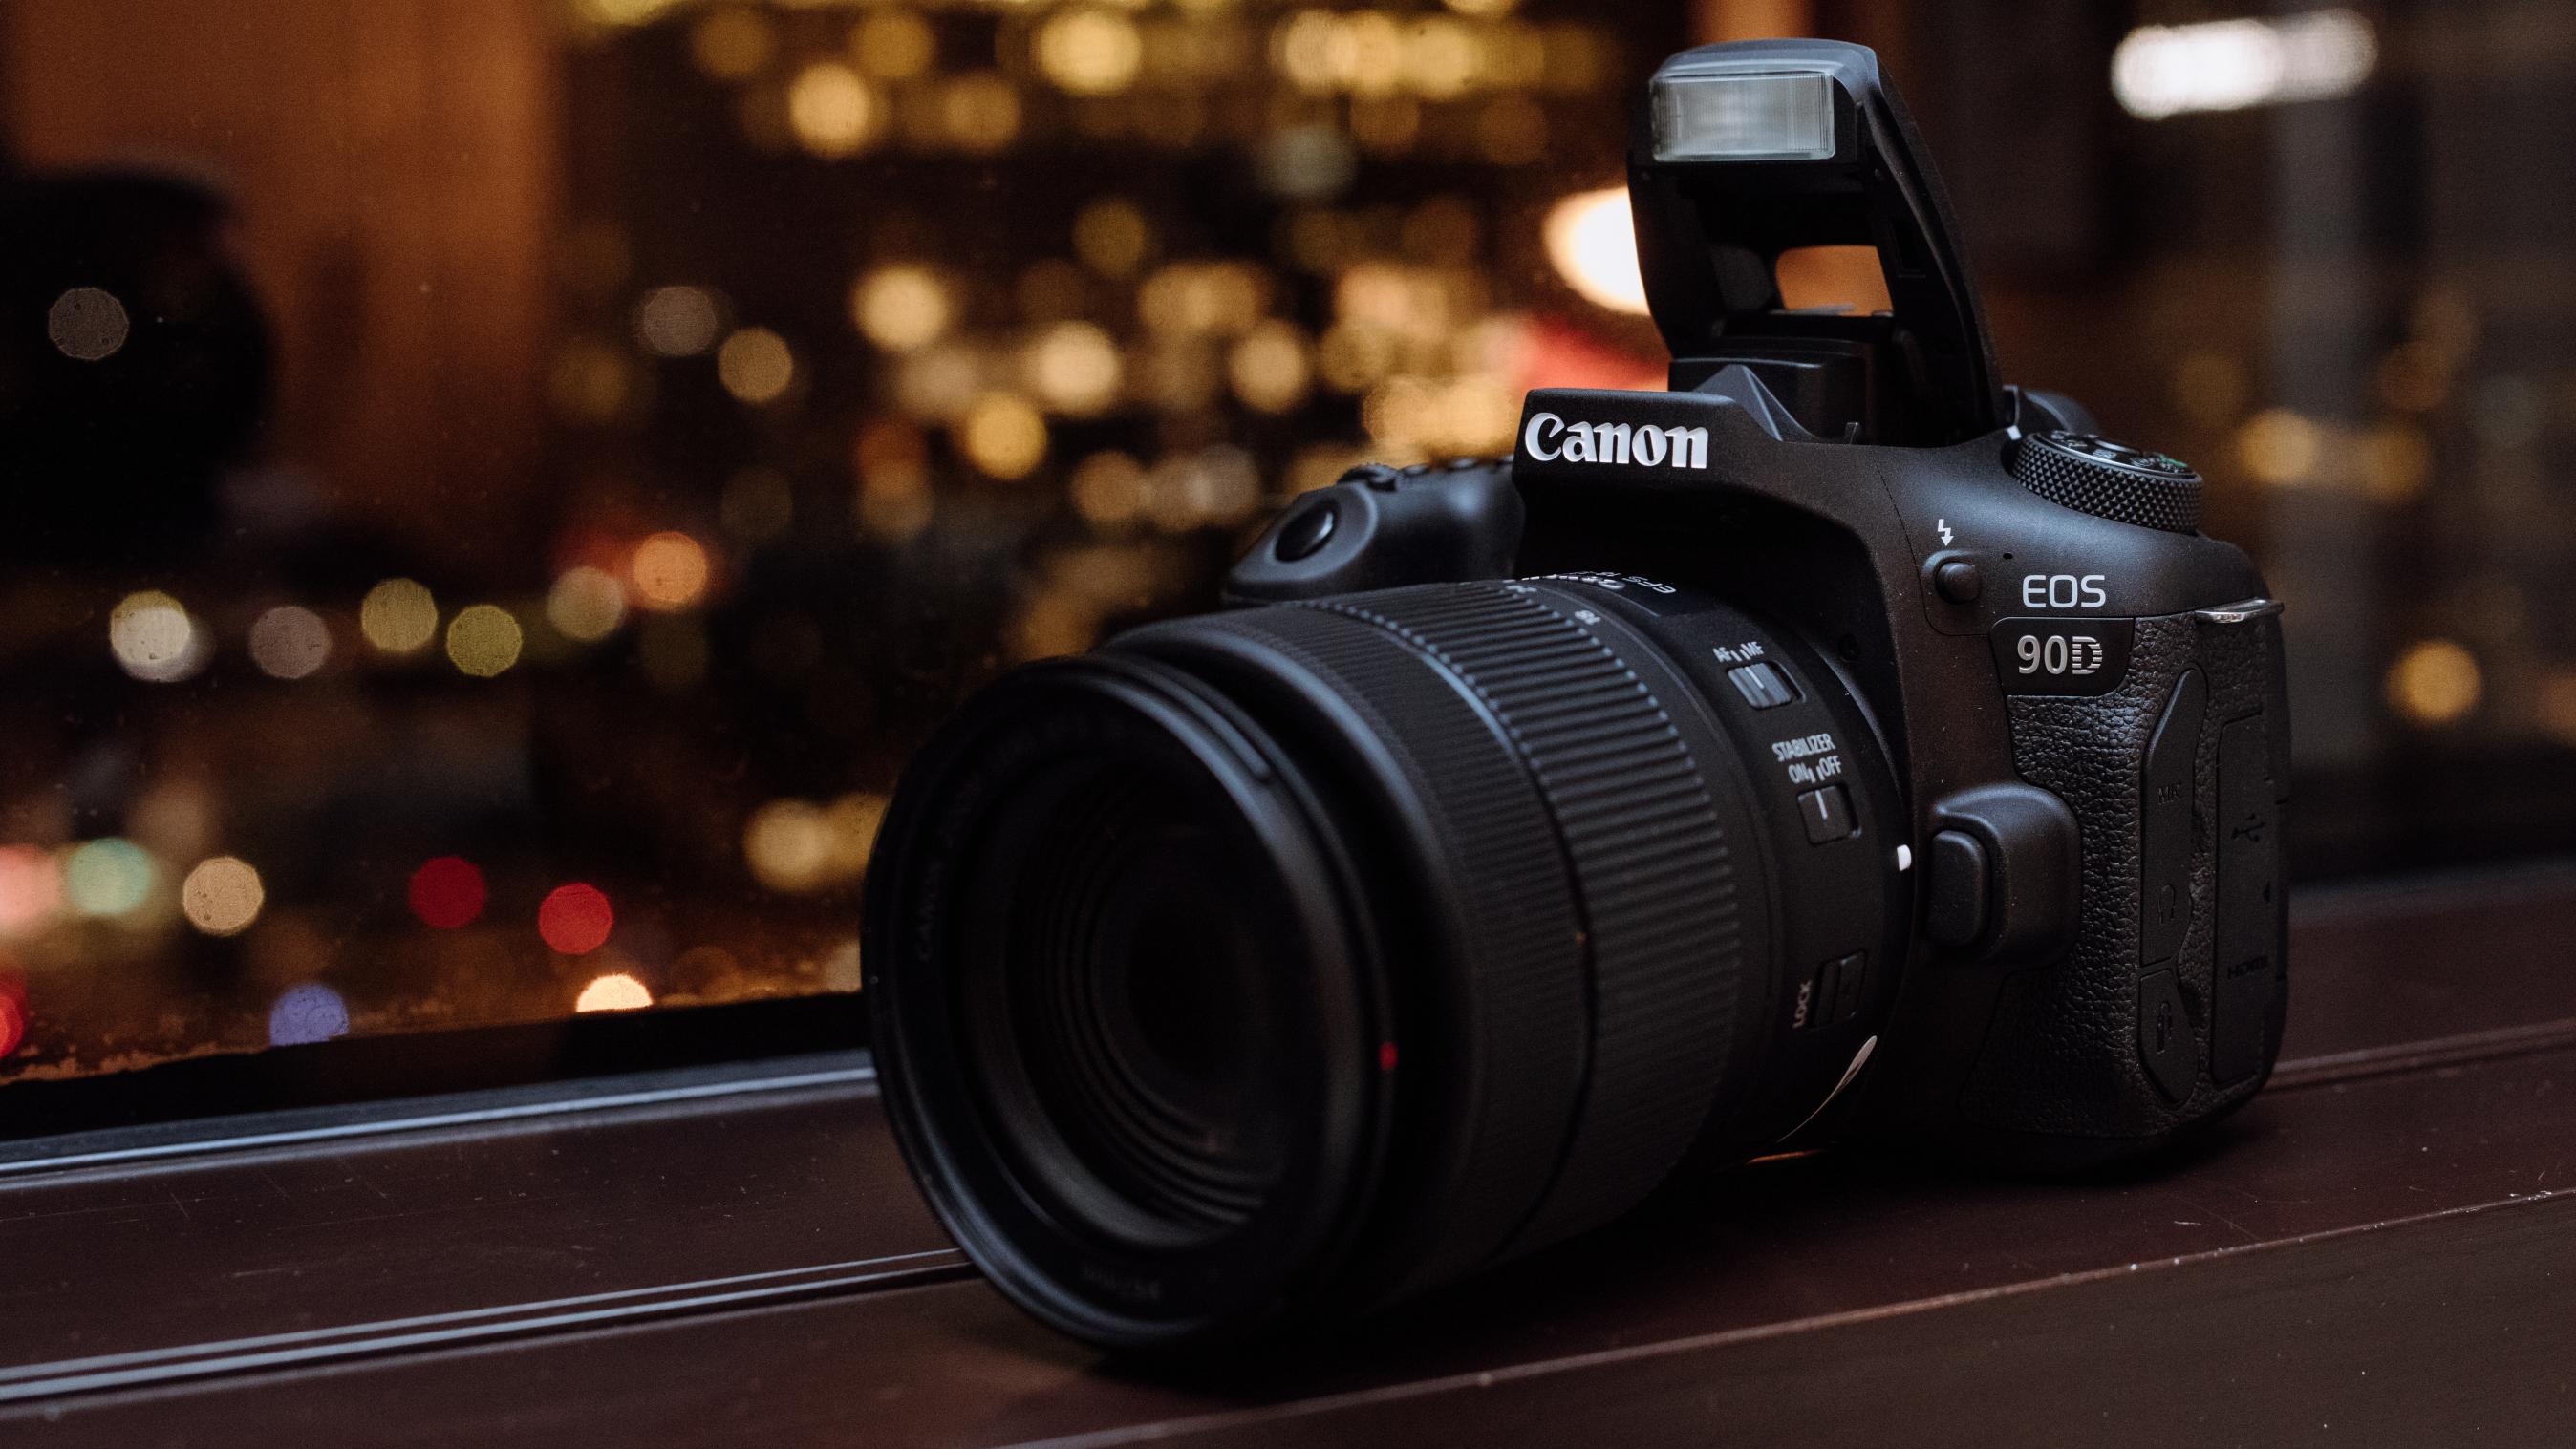 Canon 90d Image Quality - HD Wallpaper 